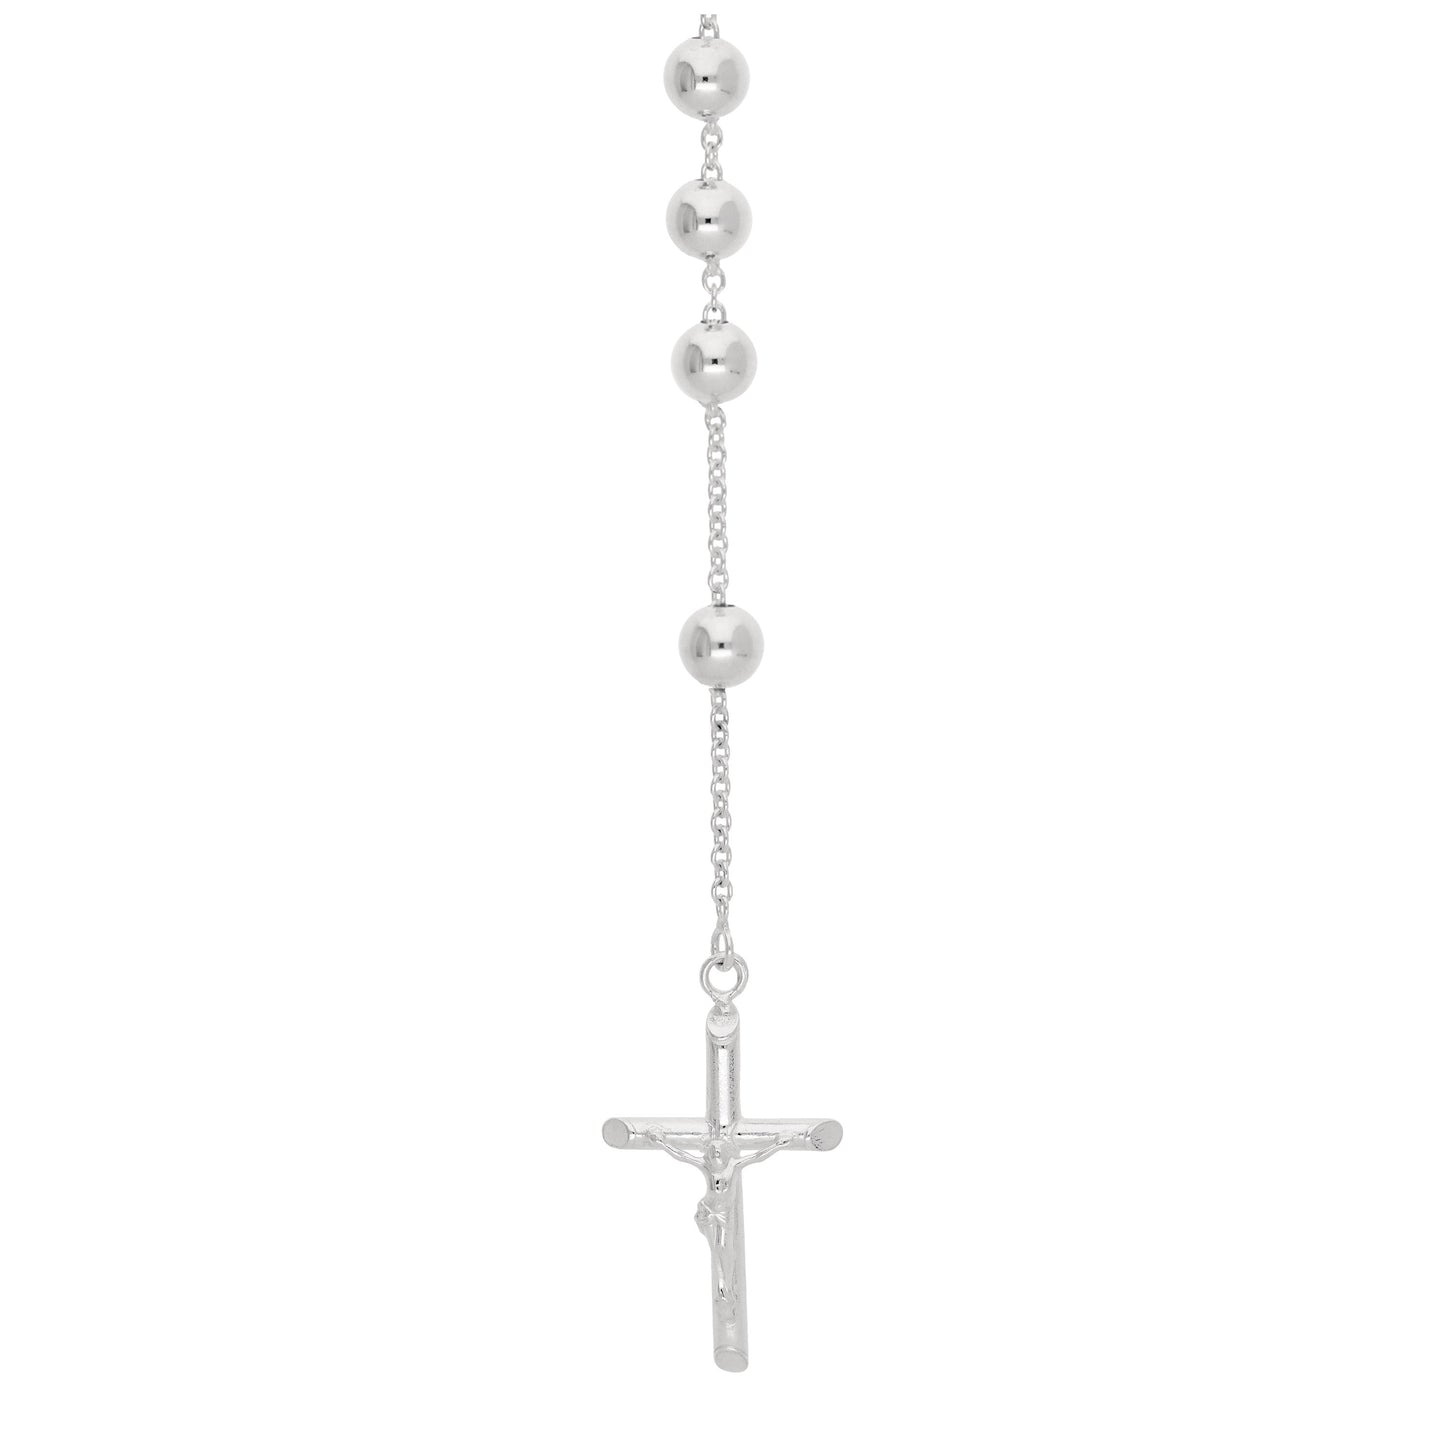 Heavy Sterling Silver Rosary Bead Necklace